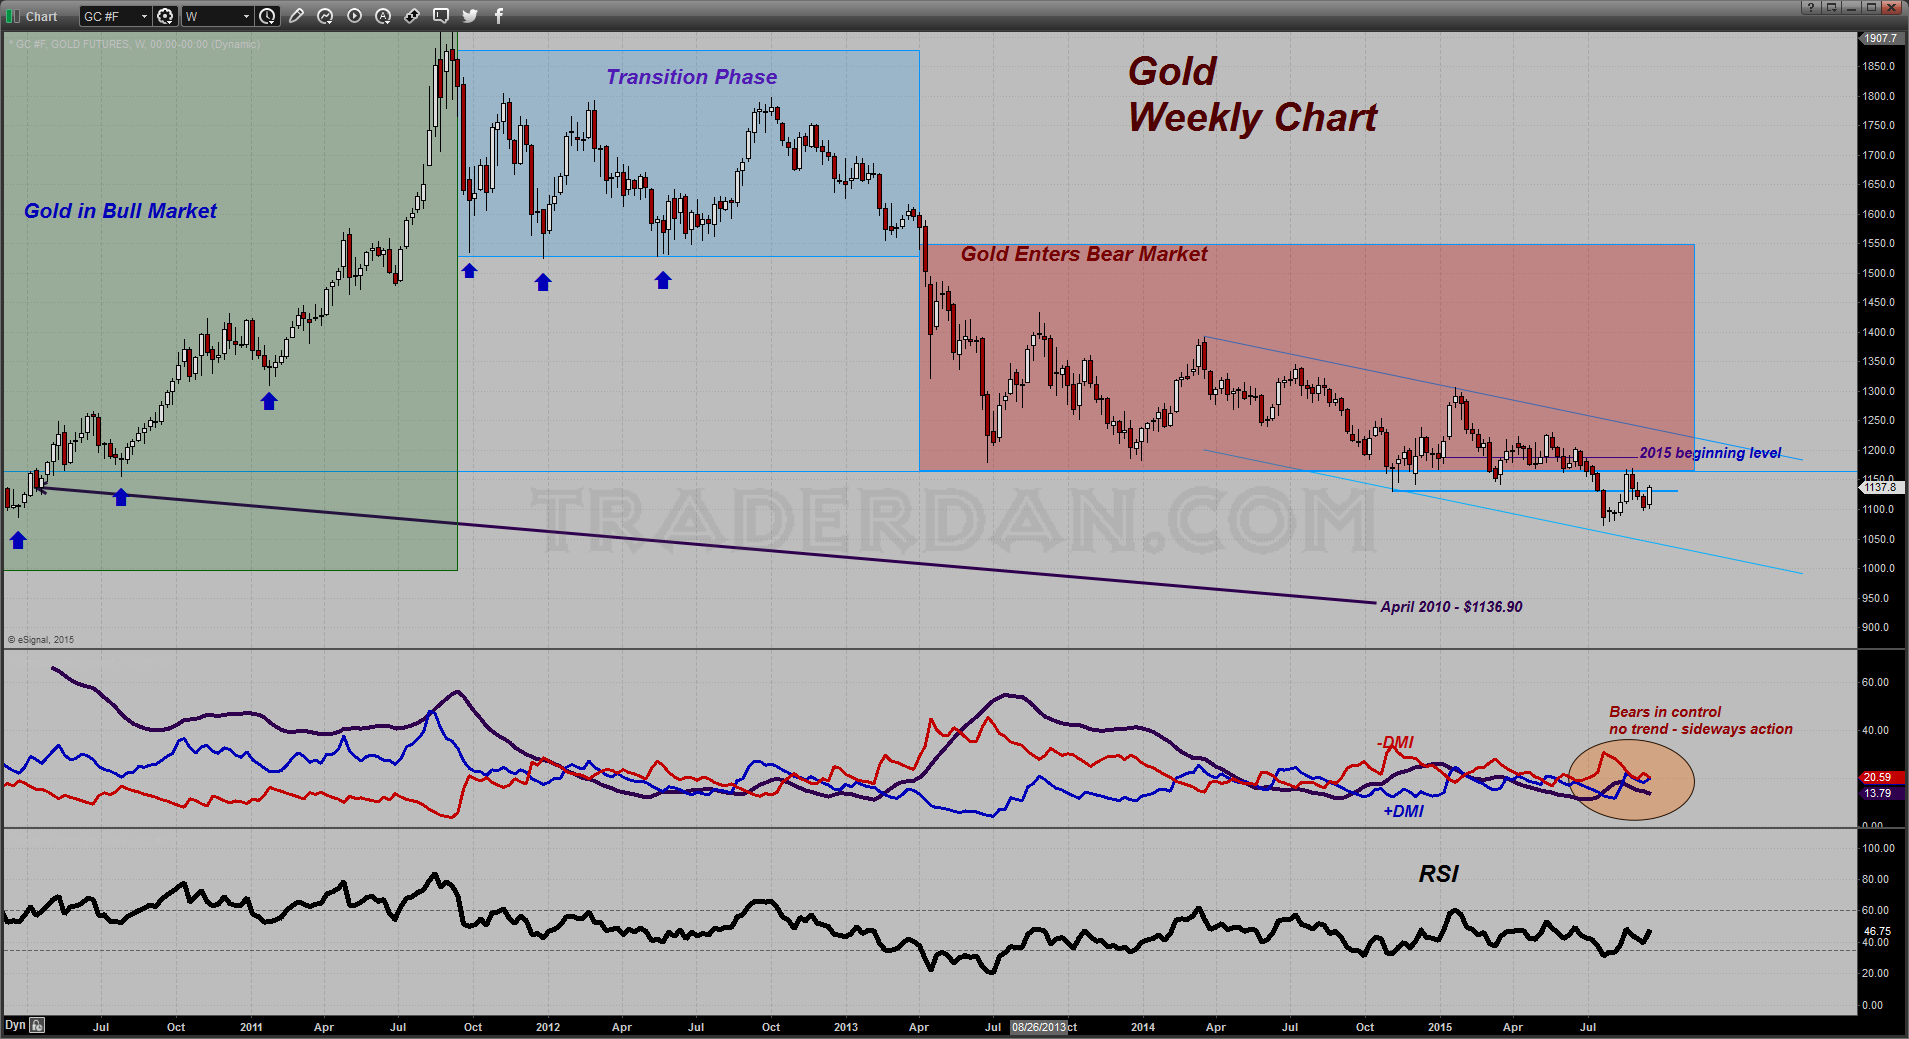 Gold Weekly 2010-2015